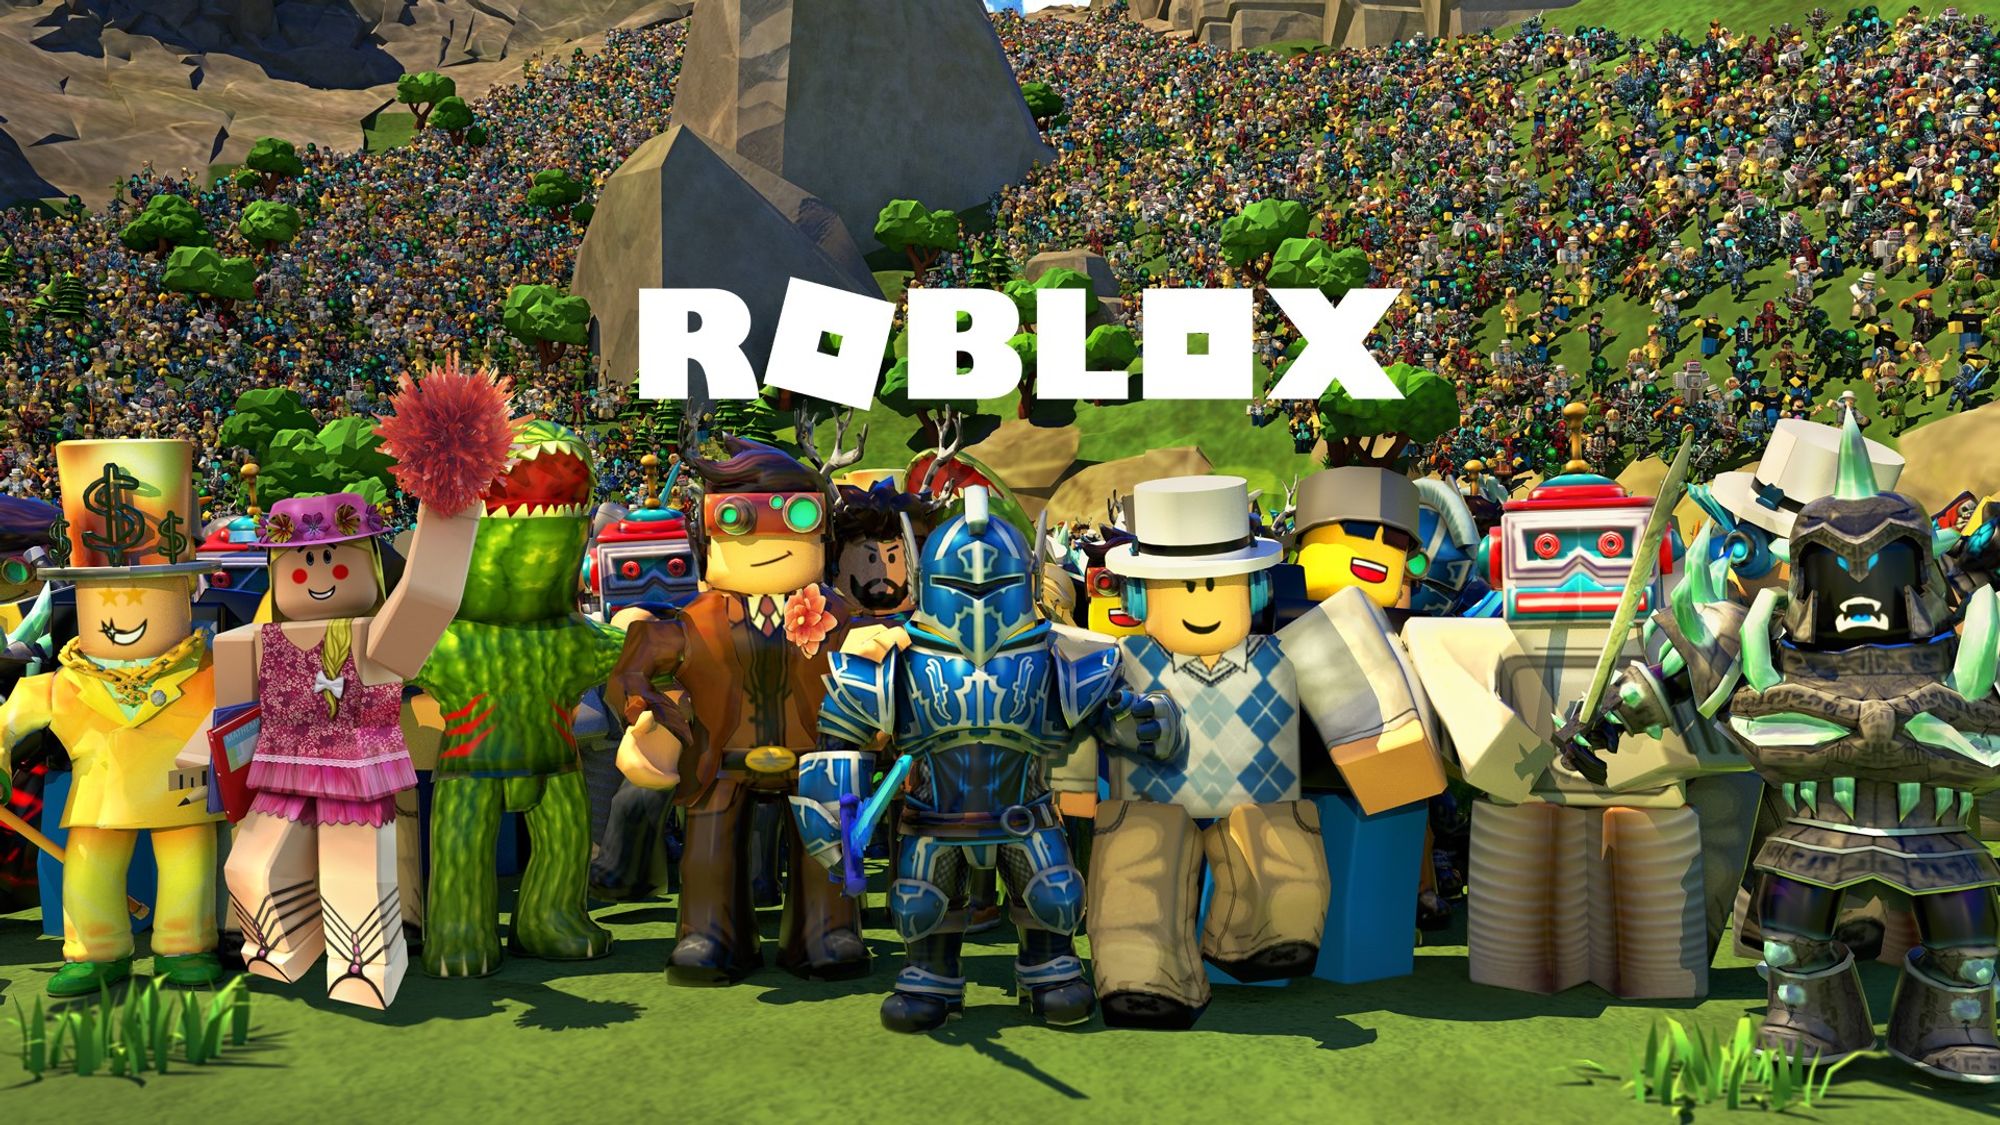 How To Get Free Robux Hack - itosfunrobux roblox robux hack cheat engine srobloxxyz